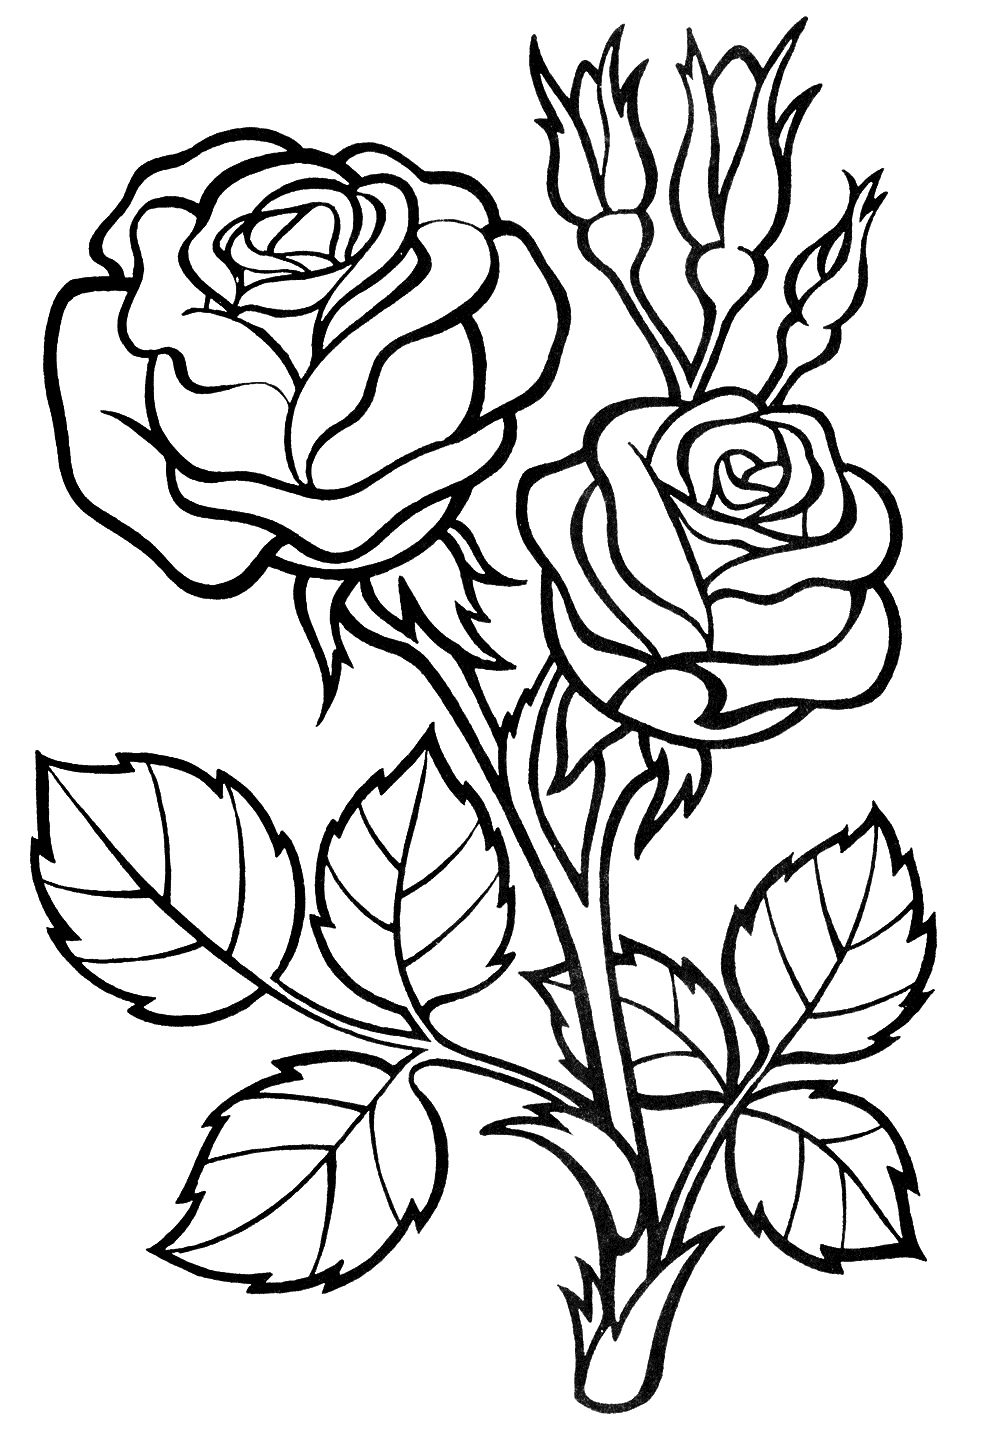 rose coloring pages roses coloring pages getcoloringpagescom coloring rose pages 